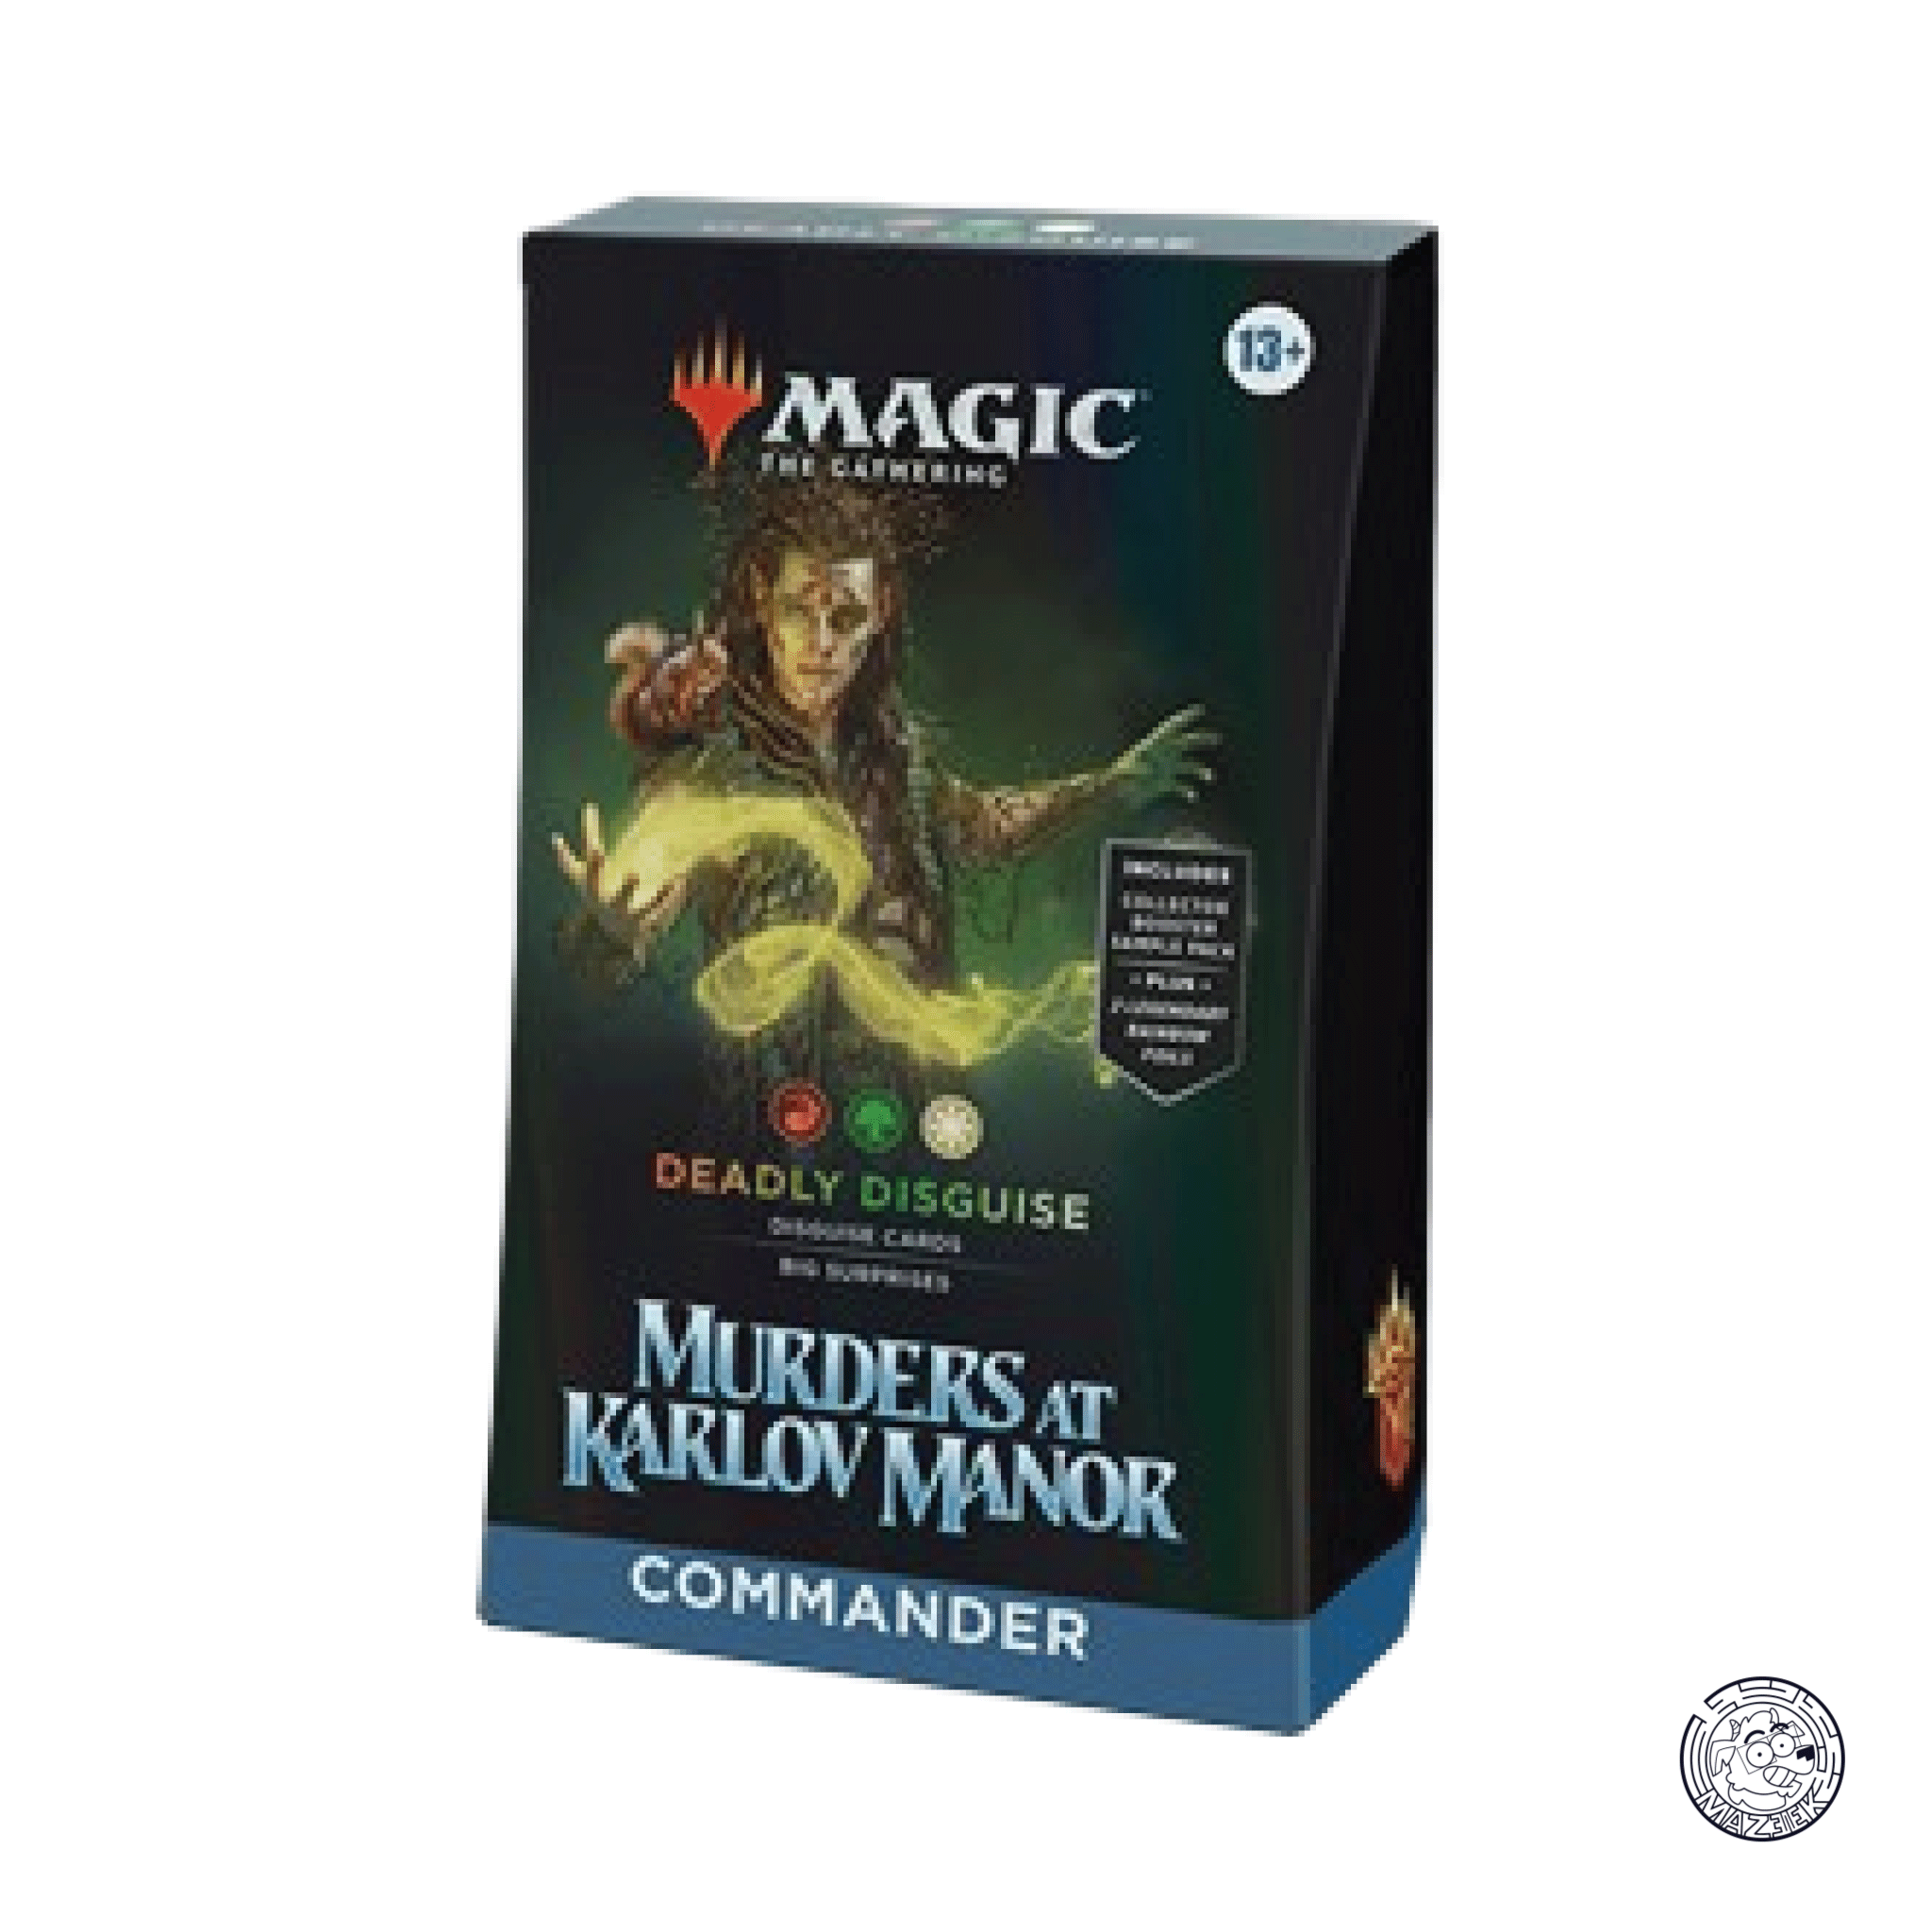 Magic the Gathering - Commander Deck: Murders at Karlov Manor "Deadly Disguise" ENG